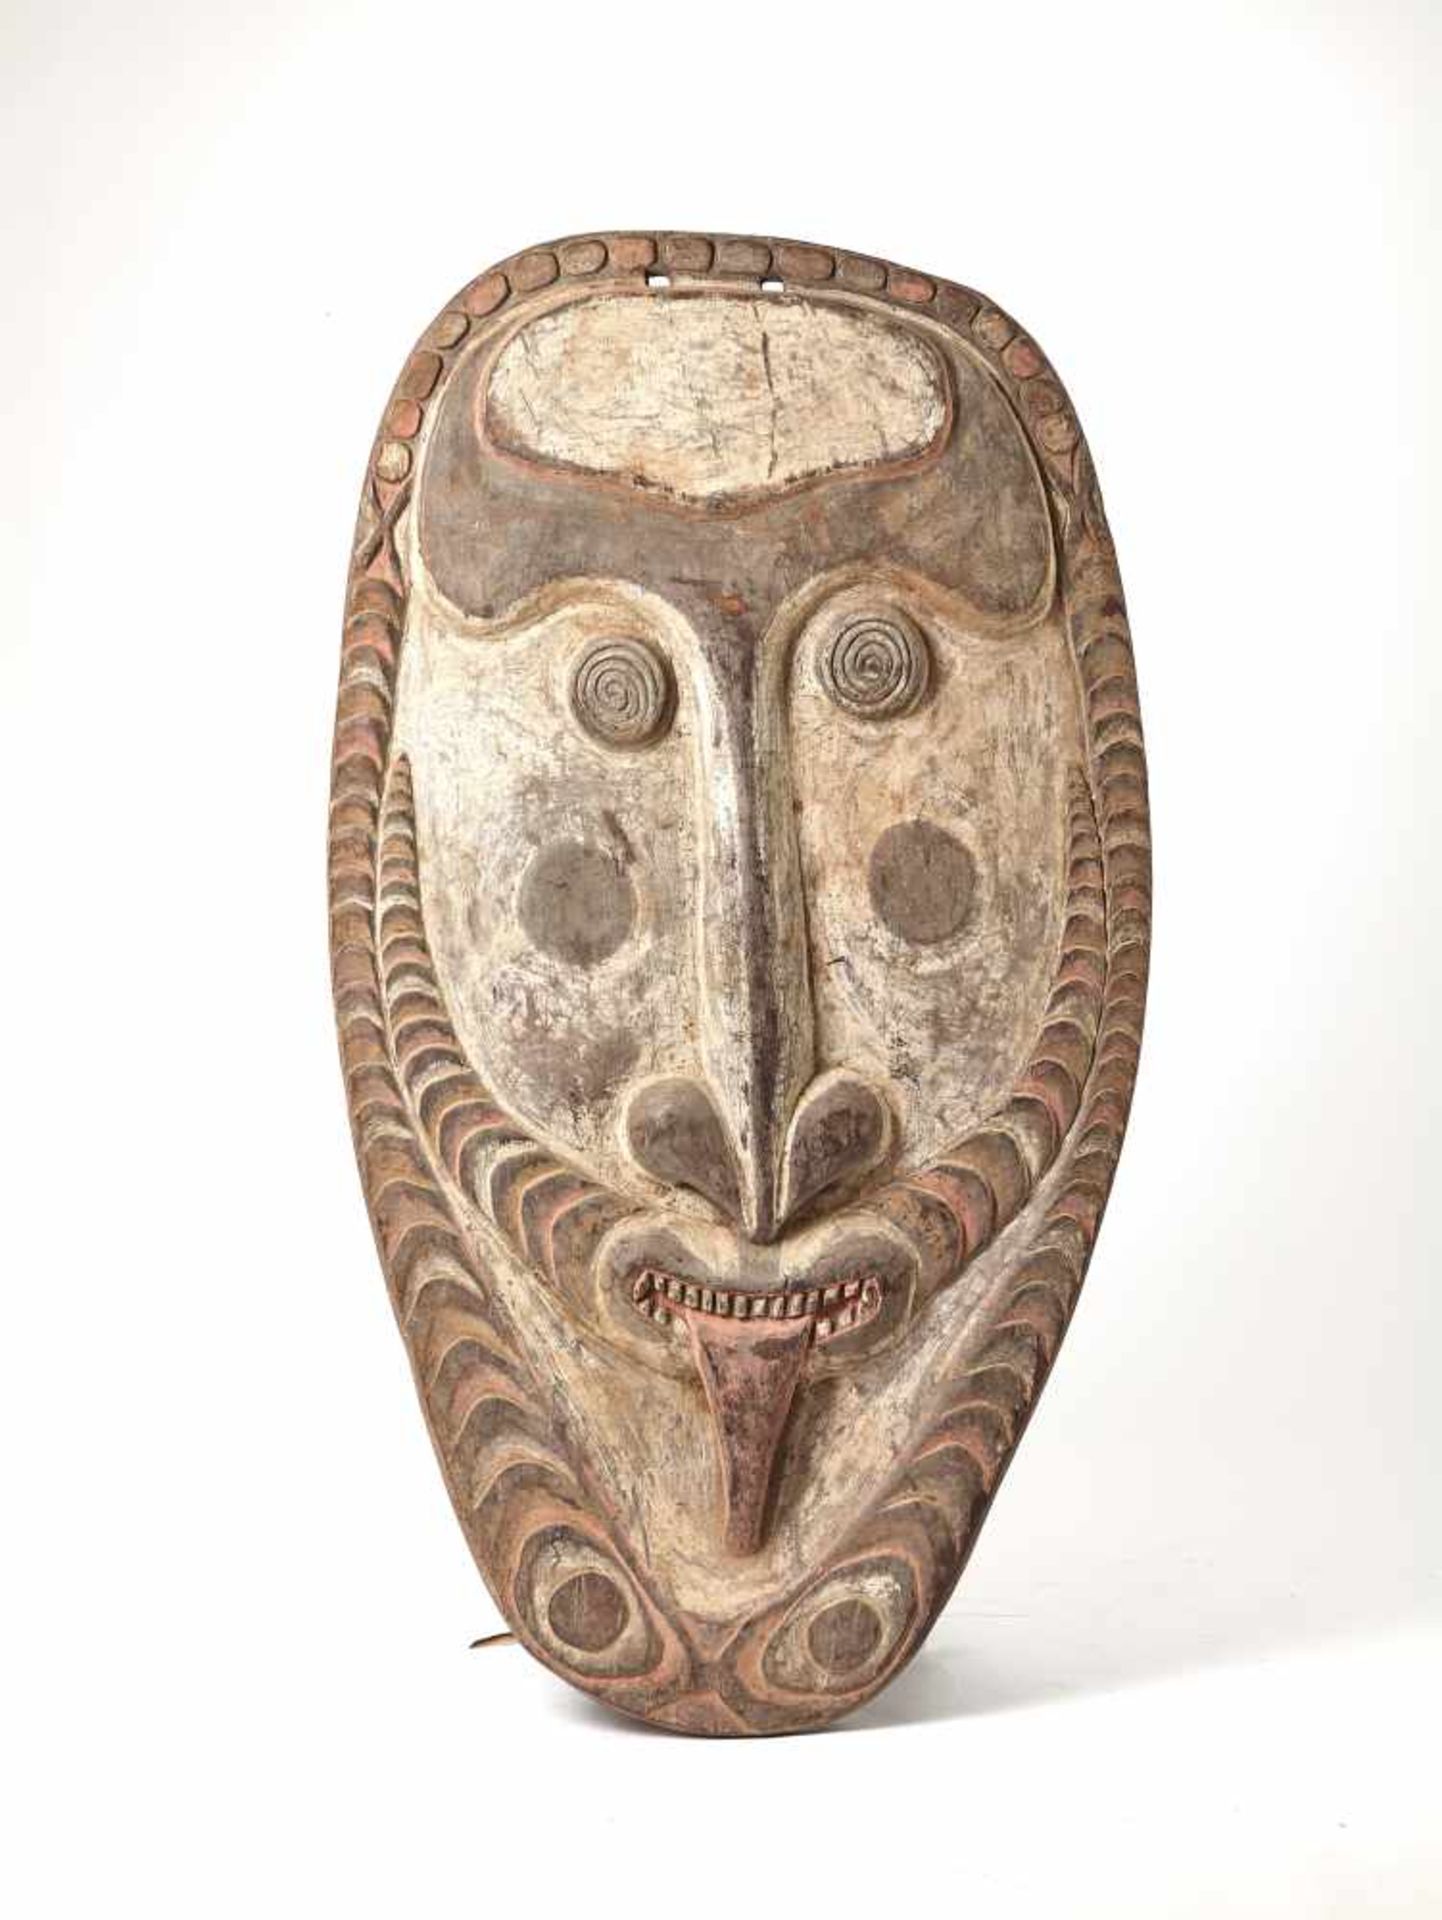 A GIGANTIC WOODEN MASK, PAPUA NEW GUINEA, 20TH CENTURYWoodPapua New Guinea, 20th centuryThis mask